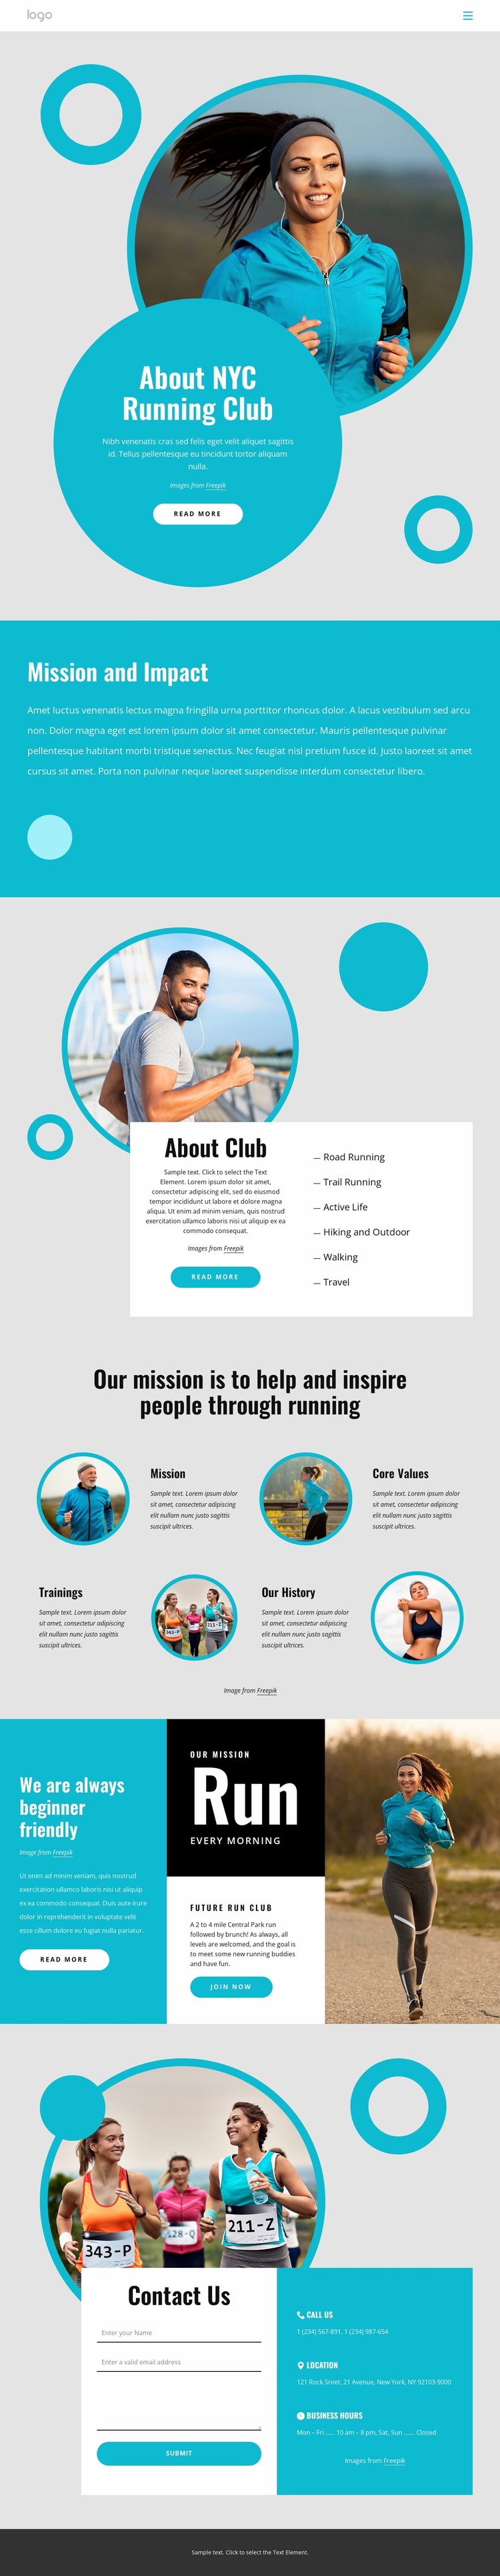 About NYC running club Landing Page